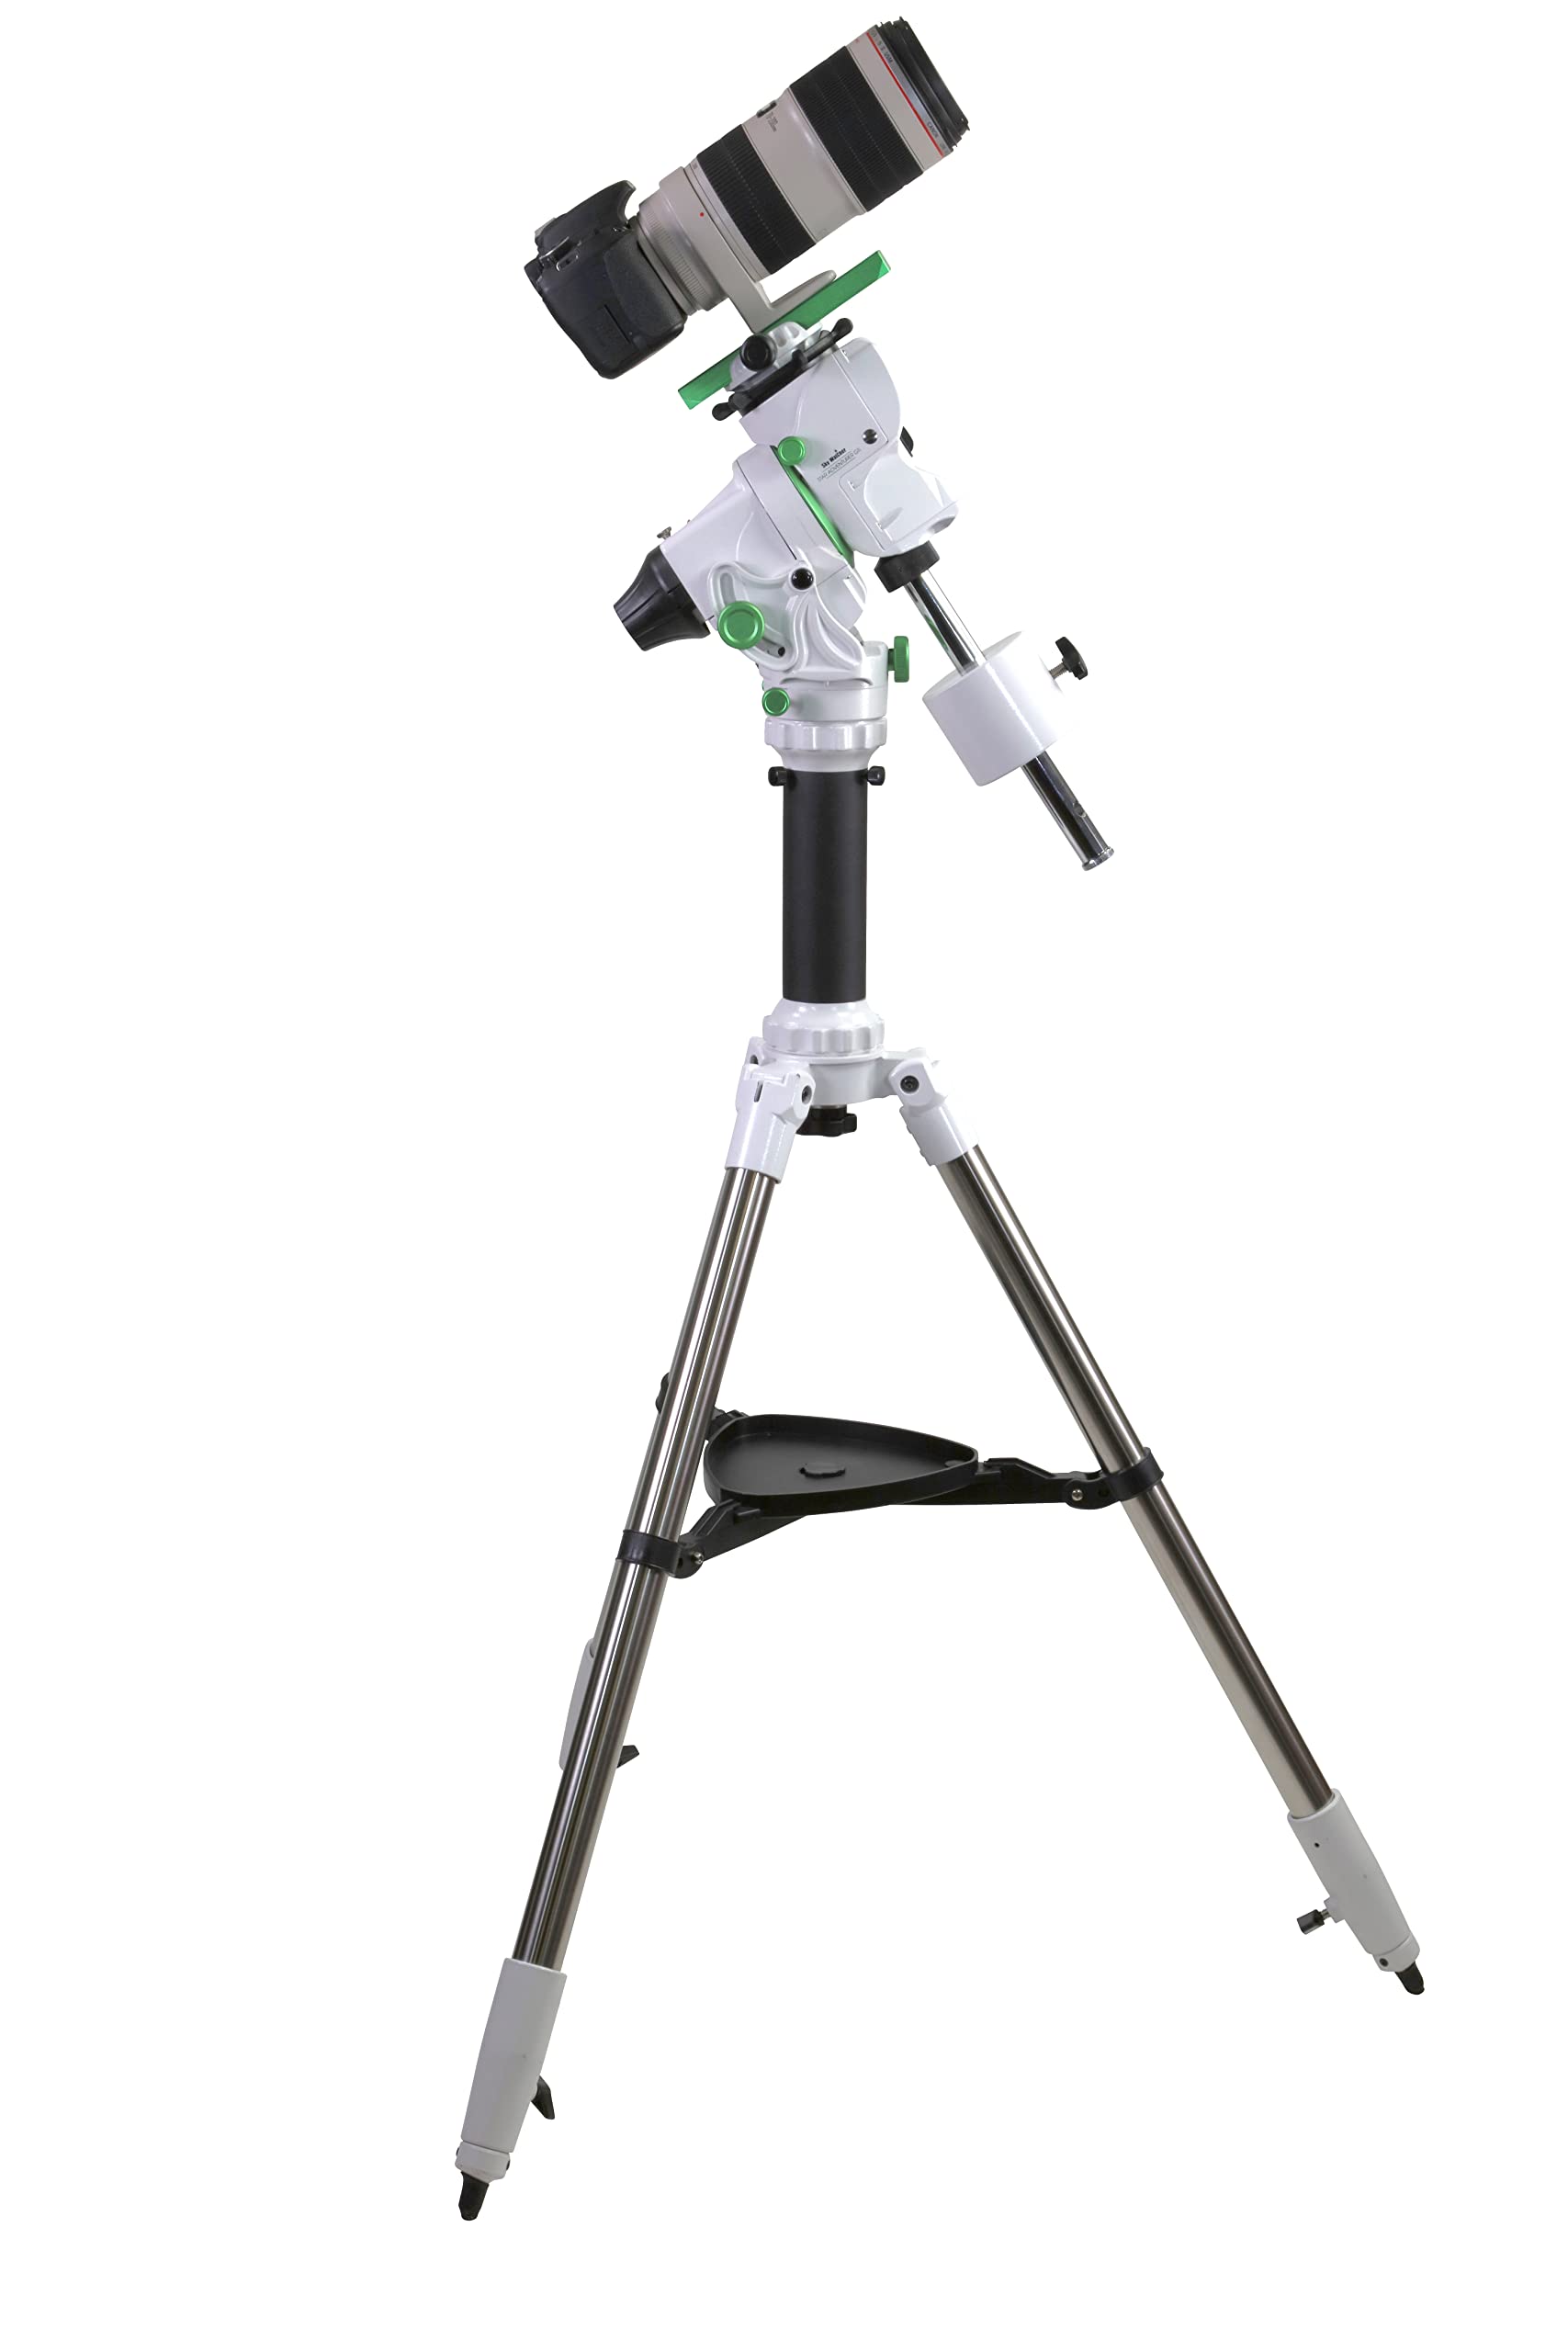 Sky-Watcher Star Adventurer GTI Mount Kit with Counterweight, CW bar, Tripod, and Pier Extension - Full GoTo EQ Tracking Mount for Portable and Lightweight Astrophotography